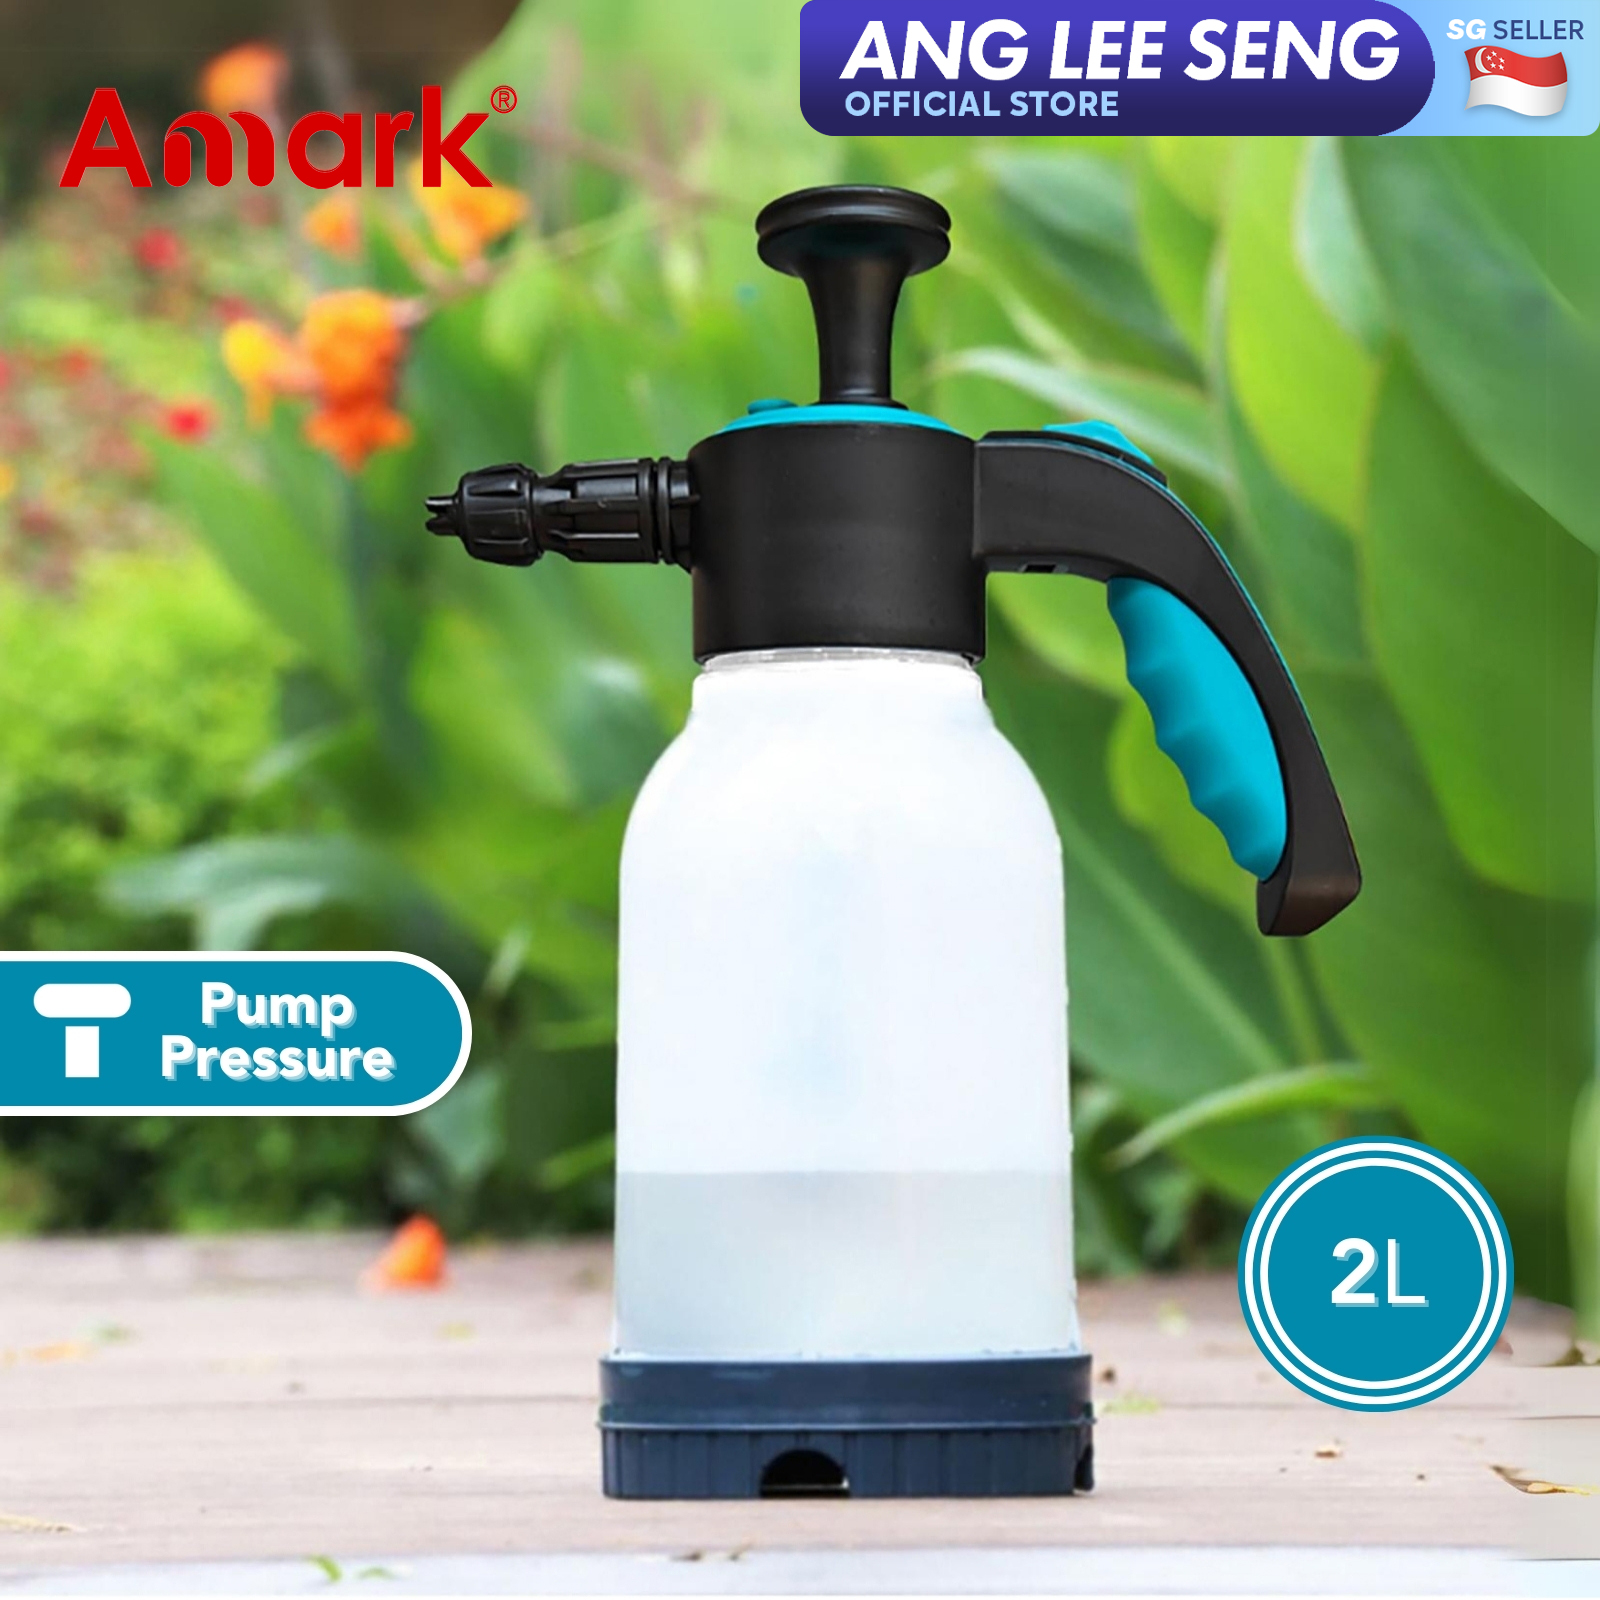 Amark Pump Pressure Water Sprayer 2L - For Watering Plants, Washing Car, Cleaning & Disinfecting